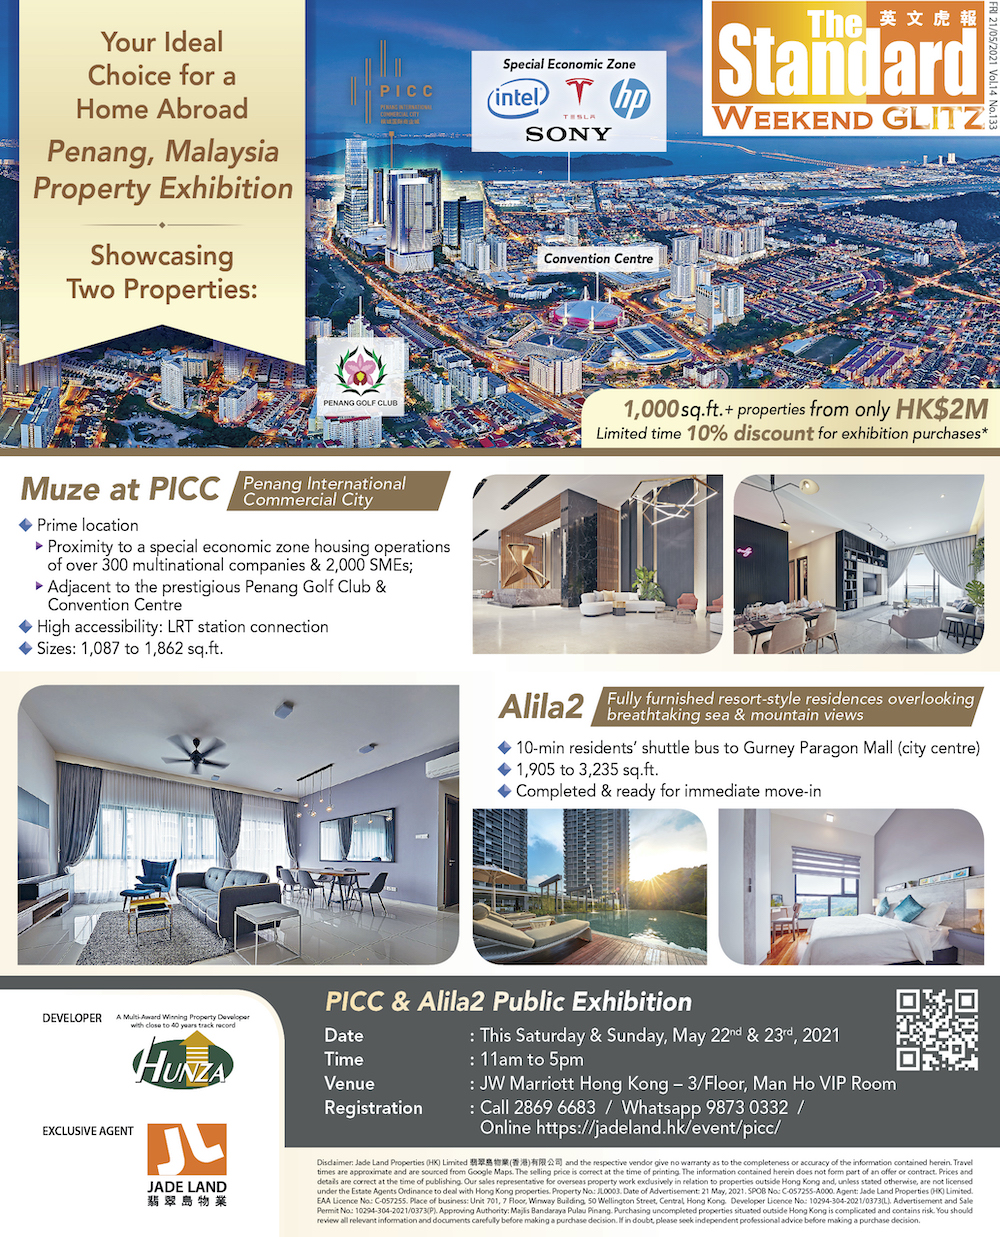 The Standard - Ideal Home Abroad_PICC & Alila2